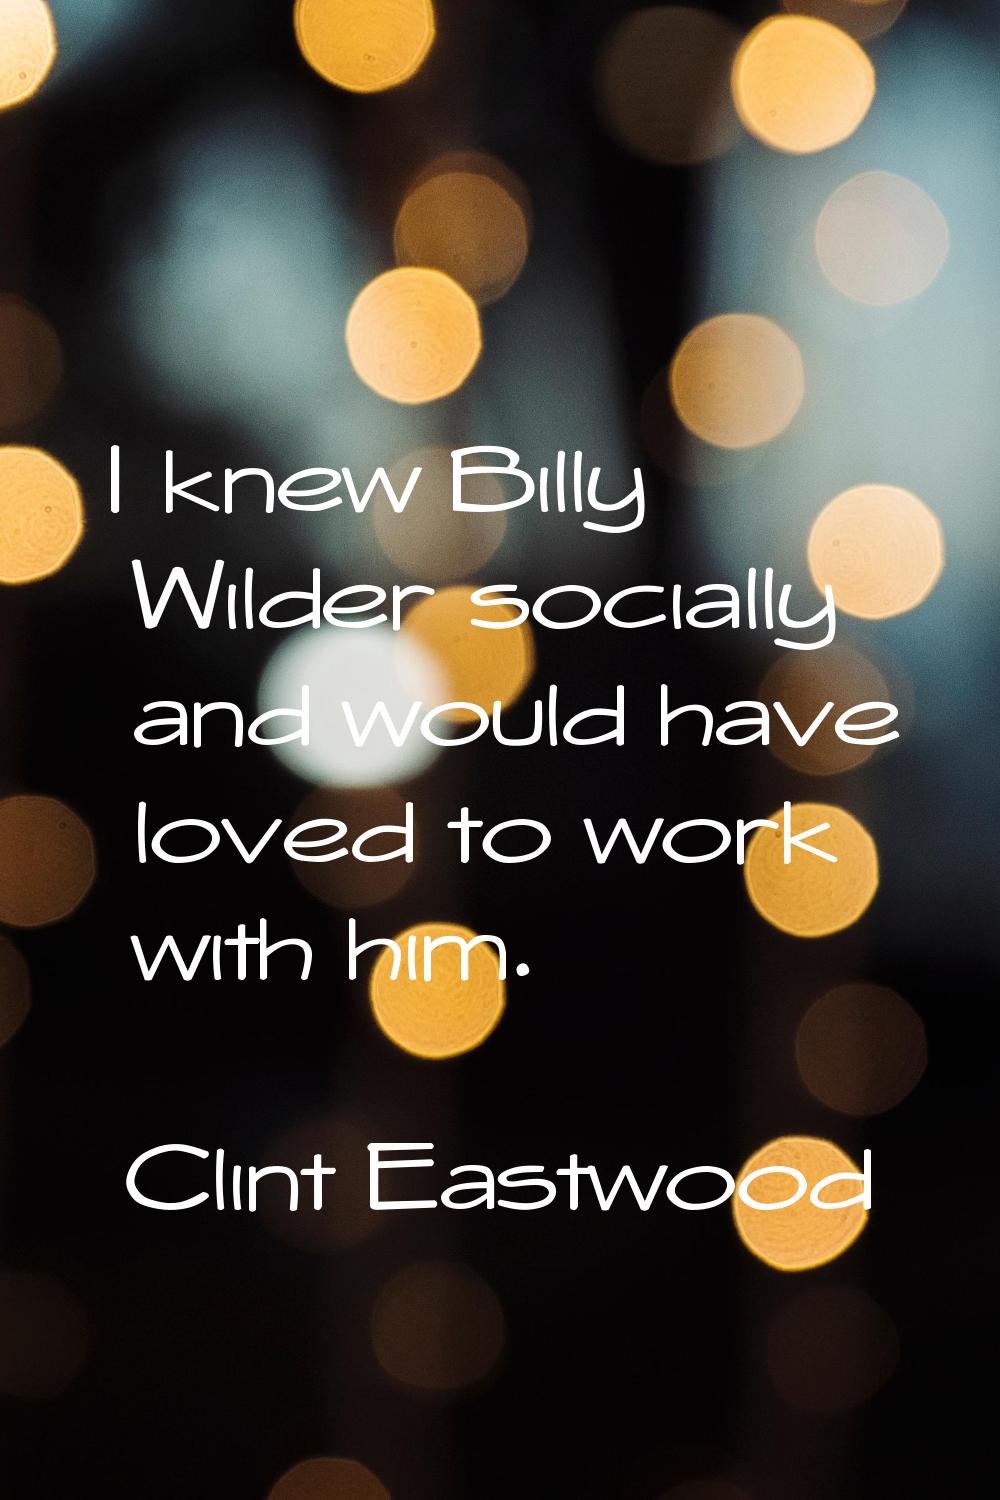 I knew Billy Wilder socially and would have loved to work with him.